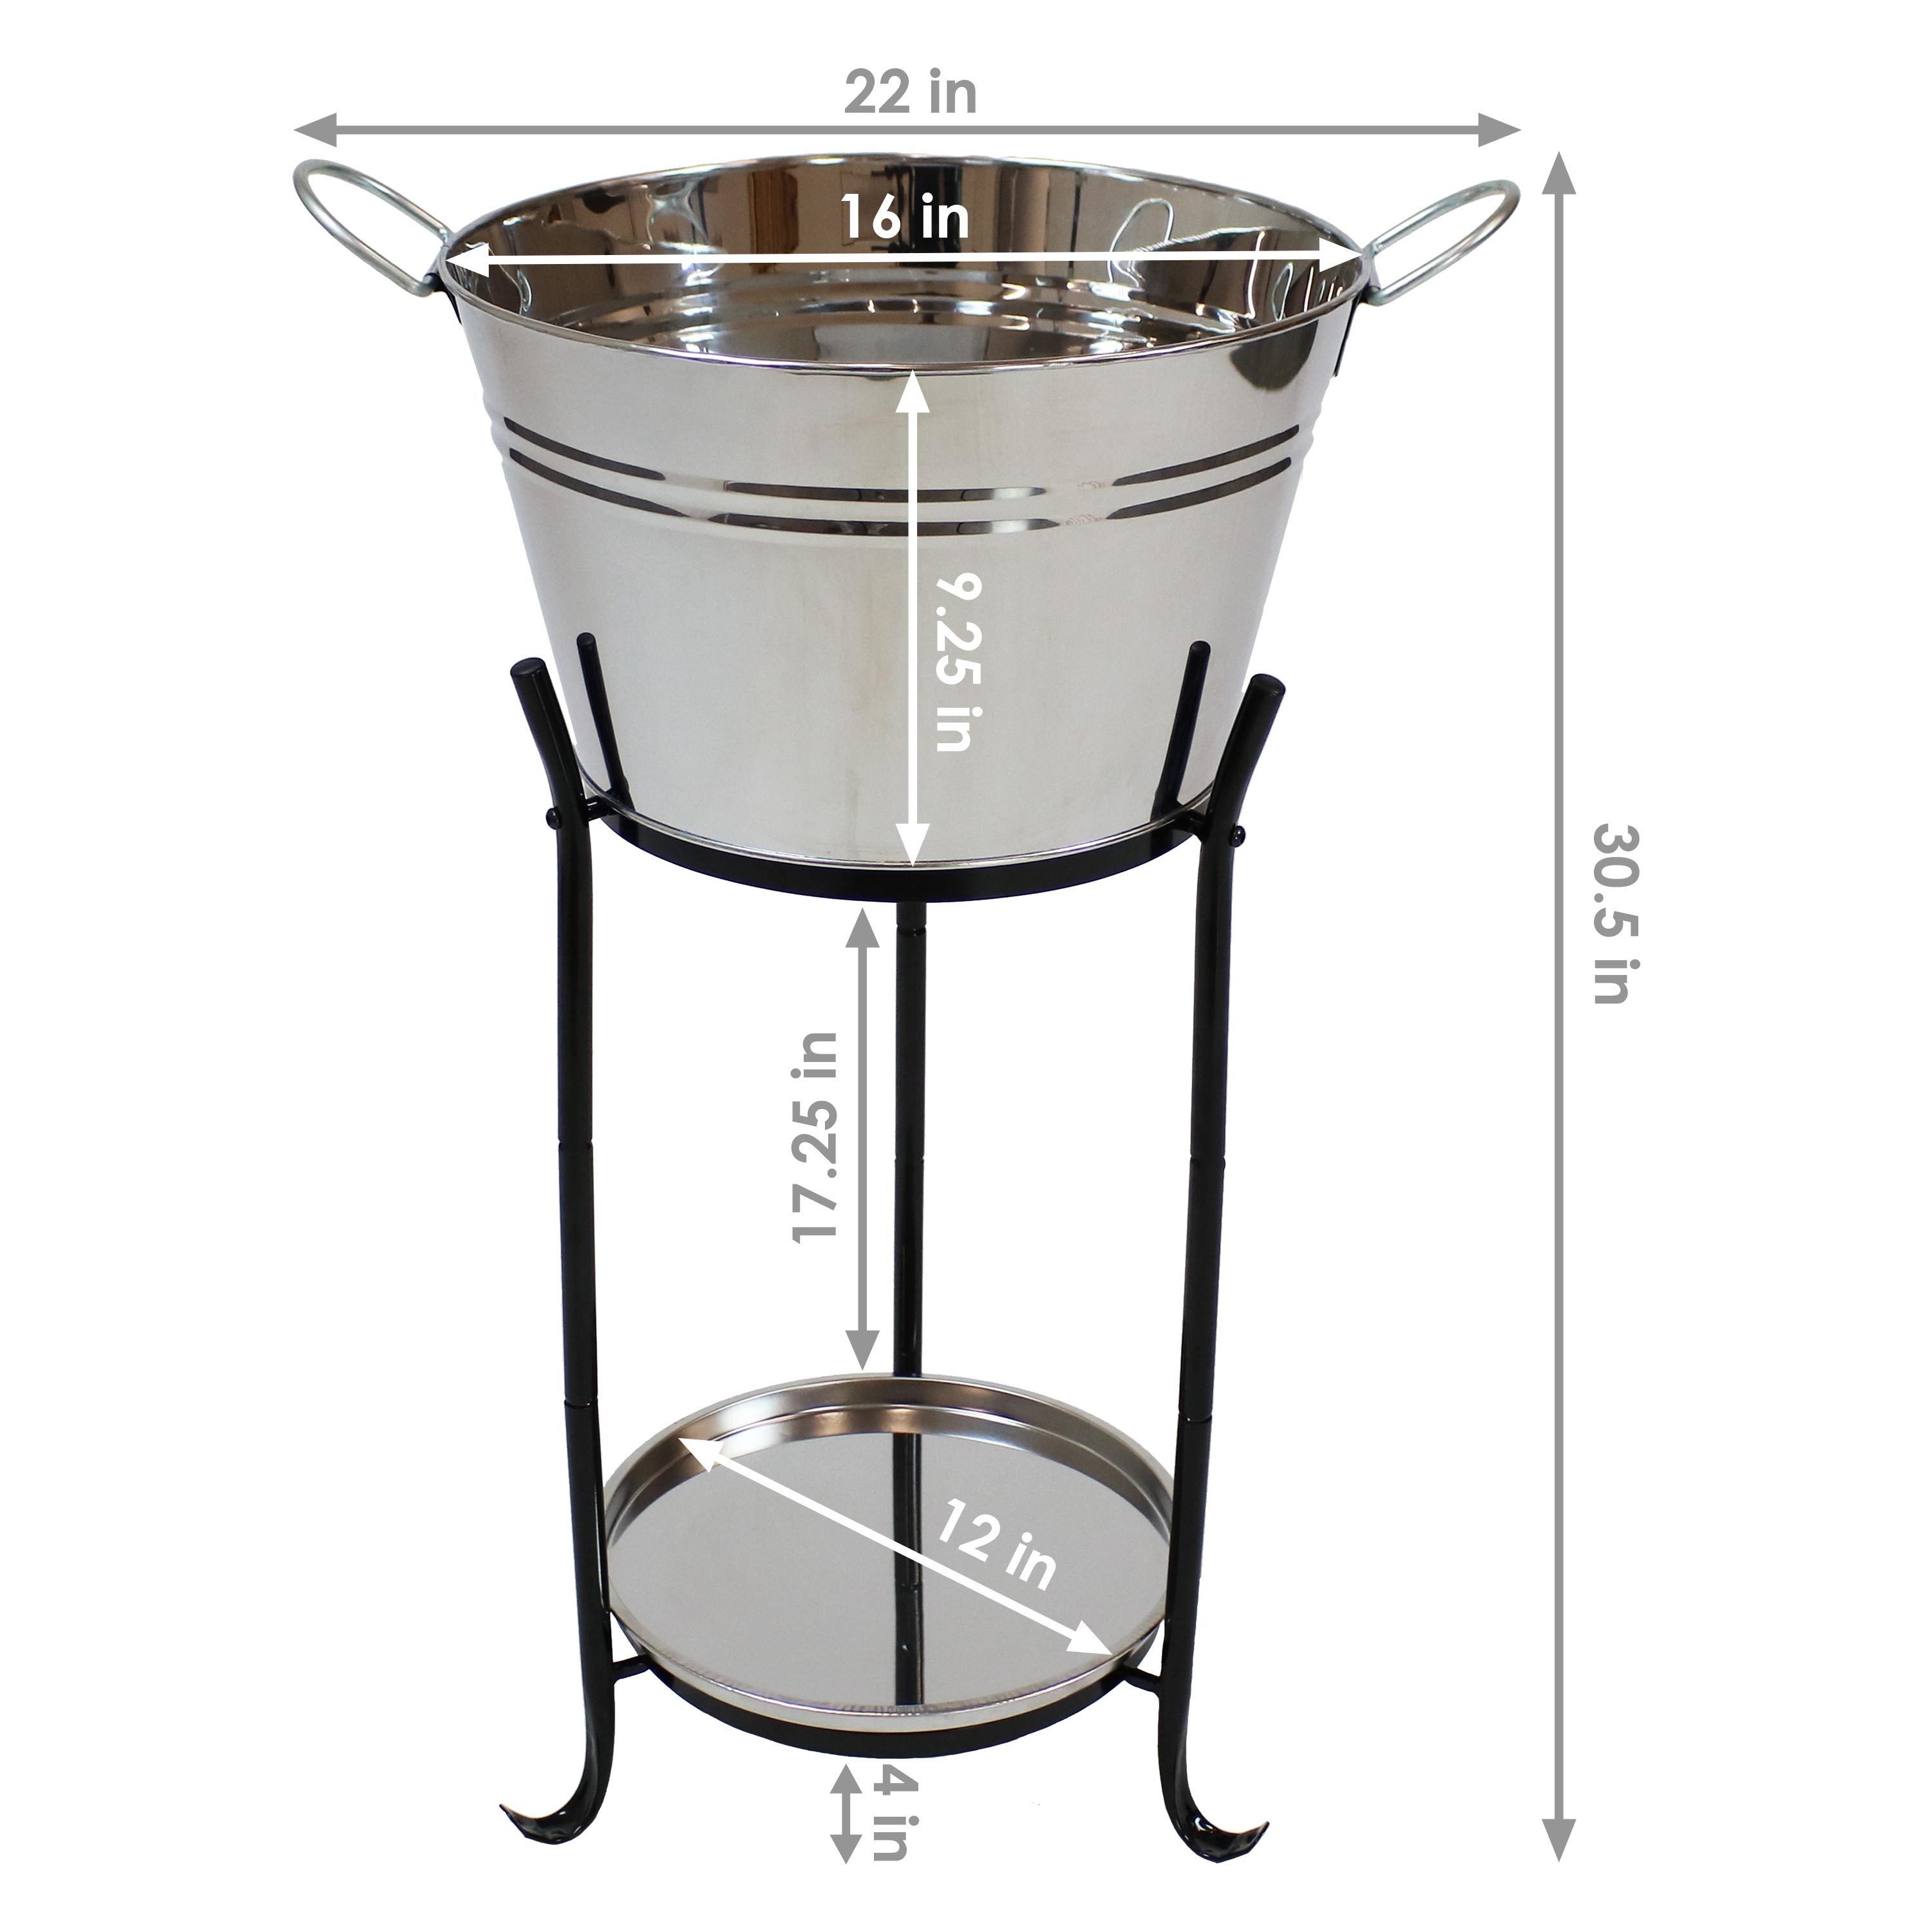 Sunnydaze Stainless Steel Ice Bucket Drink Cooler with Stand - image 3 of 11